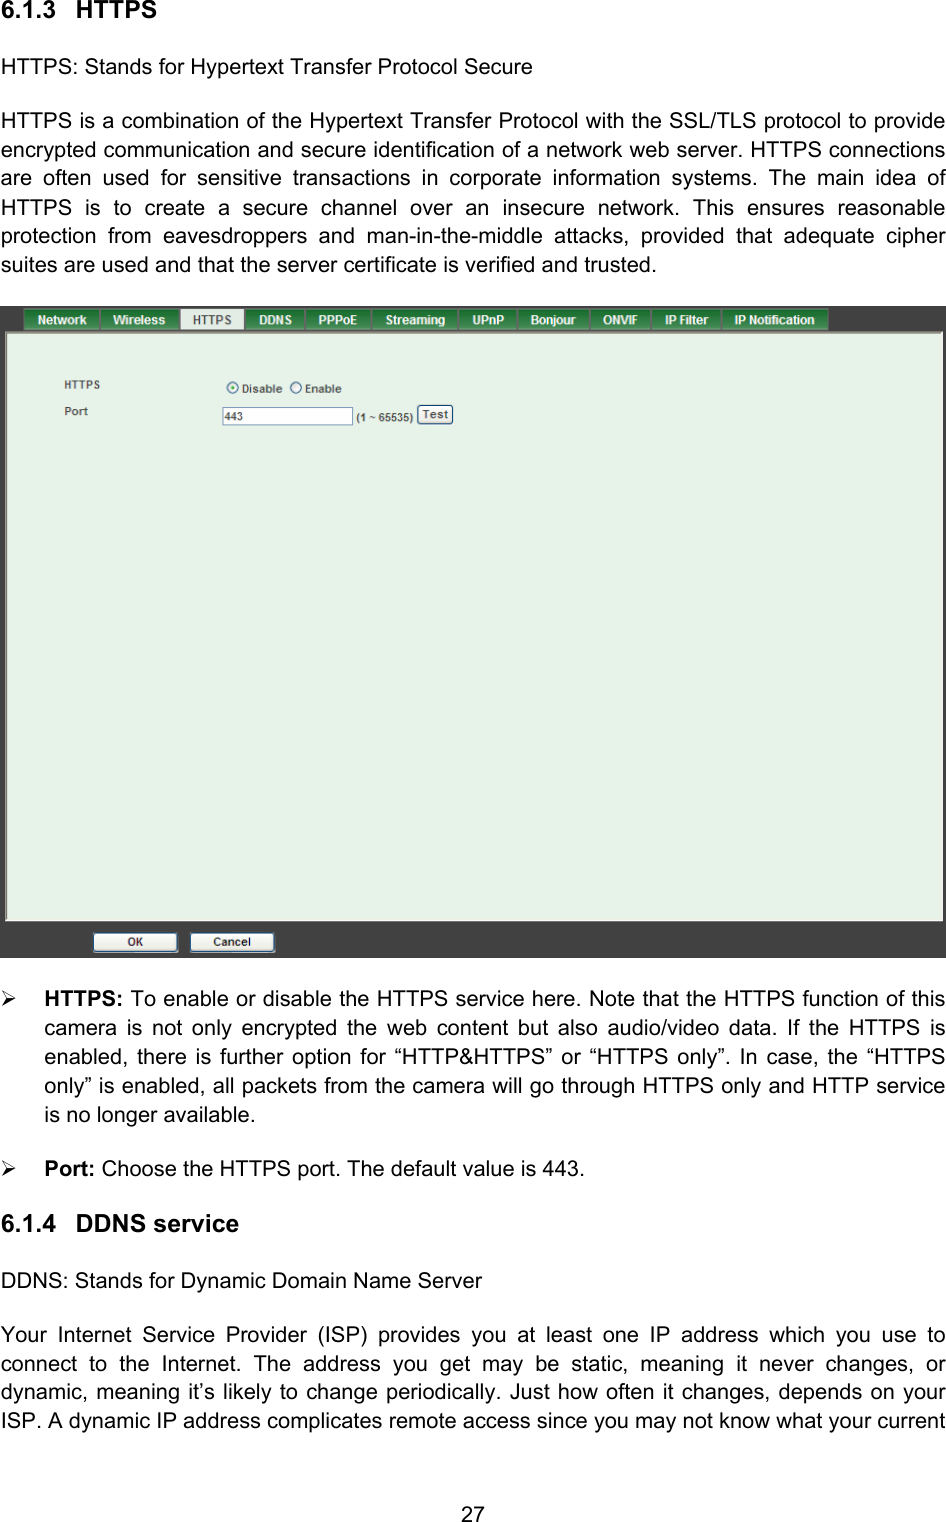  27 6.1.3 HTTPS HTTPS: Stands for Hypertext Transfer Protocol Secure HTTPS is a combination of the Hypertext Transfer Protocol with the SSL/TLS protocol to provide encrypted communication and secure identification of a network web server. HTTPS connections are often used for sensitive transactions in corporate information systems. The main idea of HTTPS is to create a secure channel over an insecure network. This ensures reasonable protection from eavesdroppers and man-in-the-middle attacks, provided that adequate cipher suites are used and that the server certificate is verified and trusted.  ¾ HTTPS: To enable or disable the HTTPS service here. Note that the HTTPS function of this camera is not only encrypted the web content but also audio/video data. If the HTTPS is enabled, there is further option for “HTTP&amp;HTTPS” or “HTTPS only”. In case, the “HTTPS only” is enabled, all packets from the camera will go through HTTPS only and HTTP service is no longer available. ¾ Port: Choose the HTTPS port. The default value is 443. 6.1.4 DDNS service DDNS: Stands for Dynamic Domain Name Server Your Internet Service Provider (ISP) provides you at least one IP address which you use to connect to the Internet. The address you get may be static, meaning it never changes, or dynamic, meaning it’s likely to change periodically. Just how often it changes, depends on your ISP. A dynamic IP address complicates remote access since you may not know what your current 